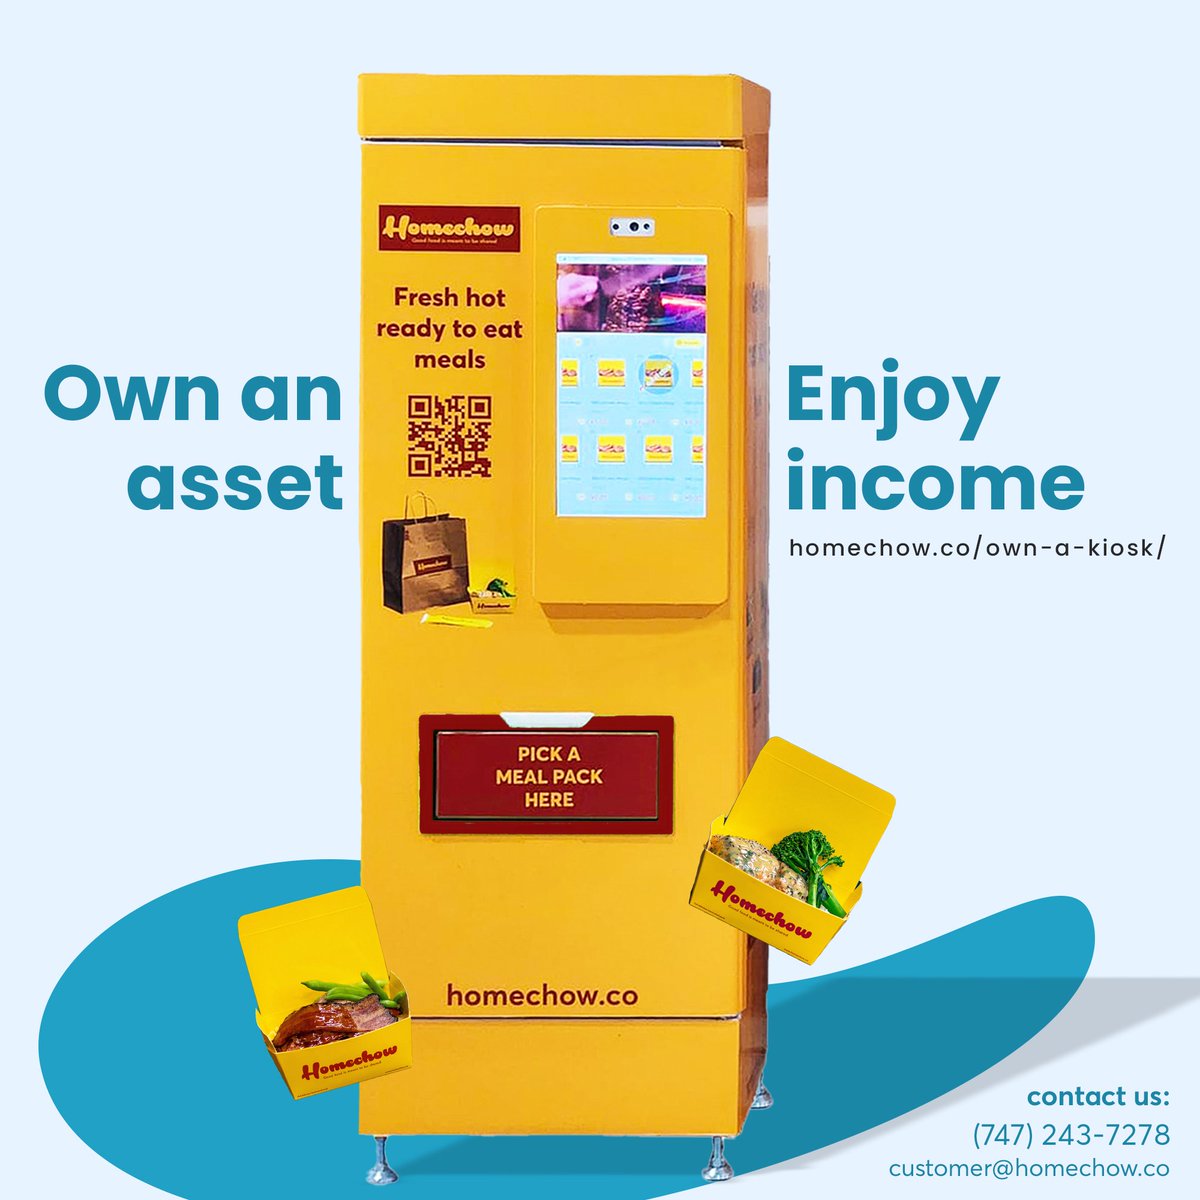 Unleash your inner foodie entrepreneur: Homechow's all-in-one package makes food business ownership simple.

Learn more: bit.ly/3Ut026x

#Homechow #FoodKiosks #NewYork #FranchiseOpportunity #Franchise #VendingKiosks #Gourmet #GourmetMeals